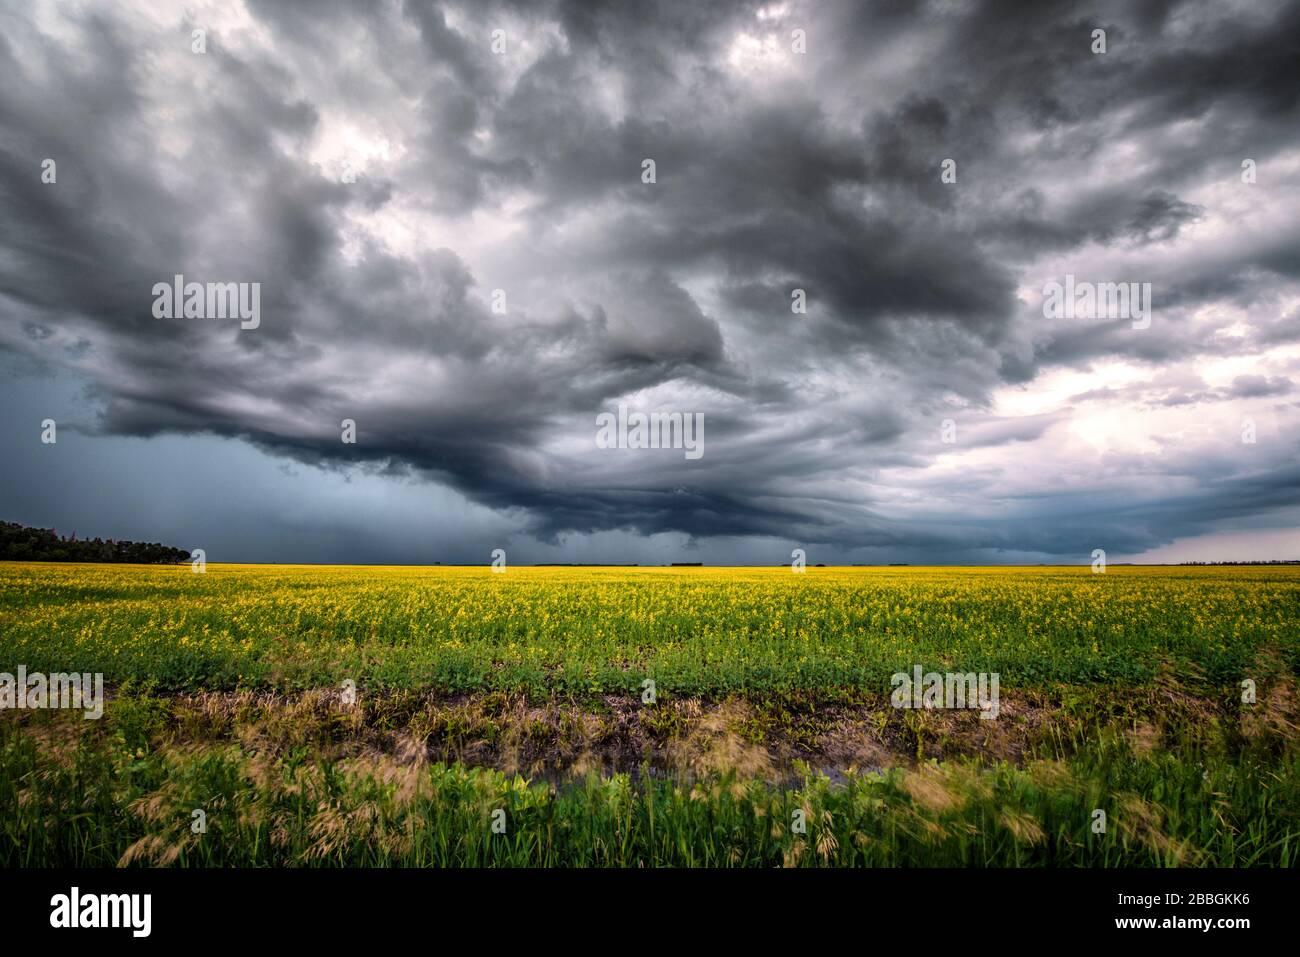 Storm shelf cloud rolling over rural canola field in rural southern Manitoba Canada Stock Photo